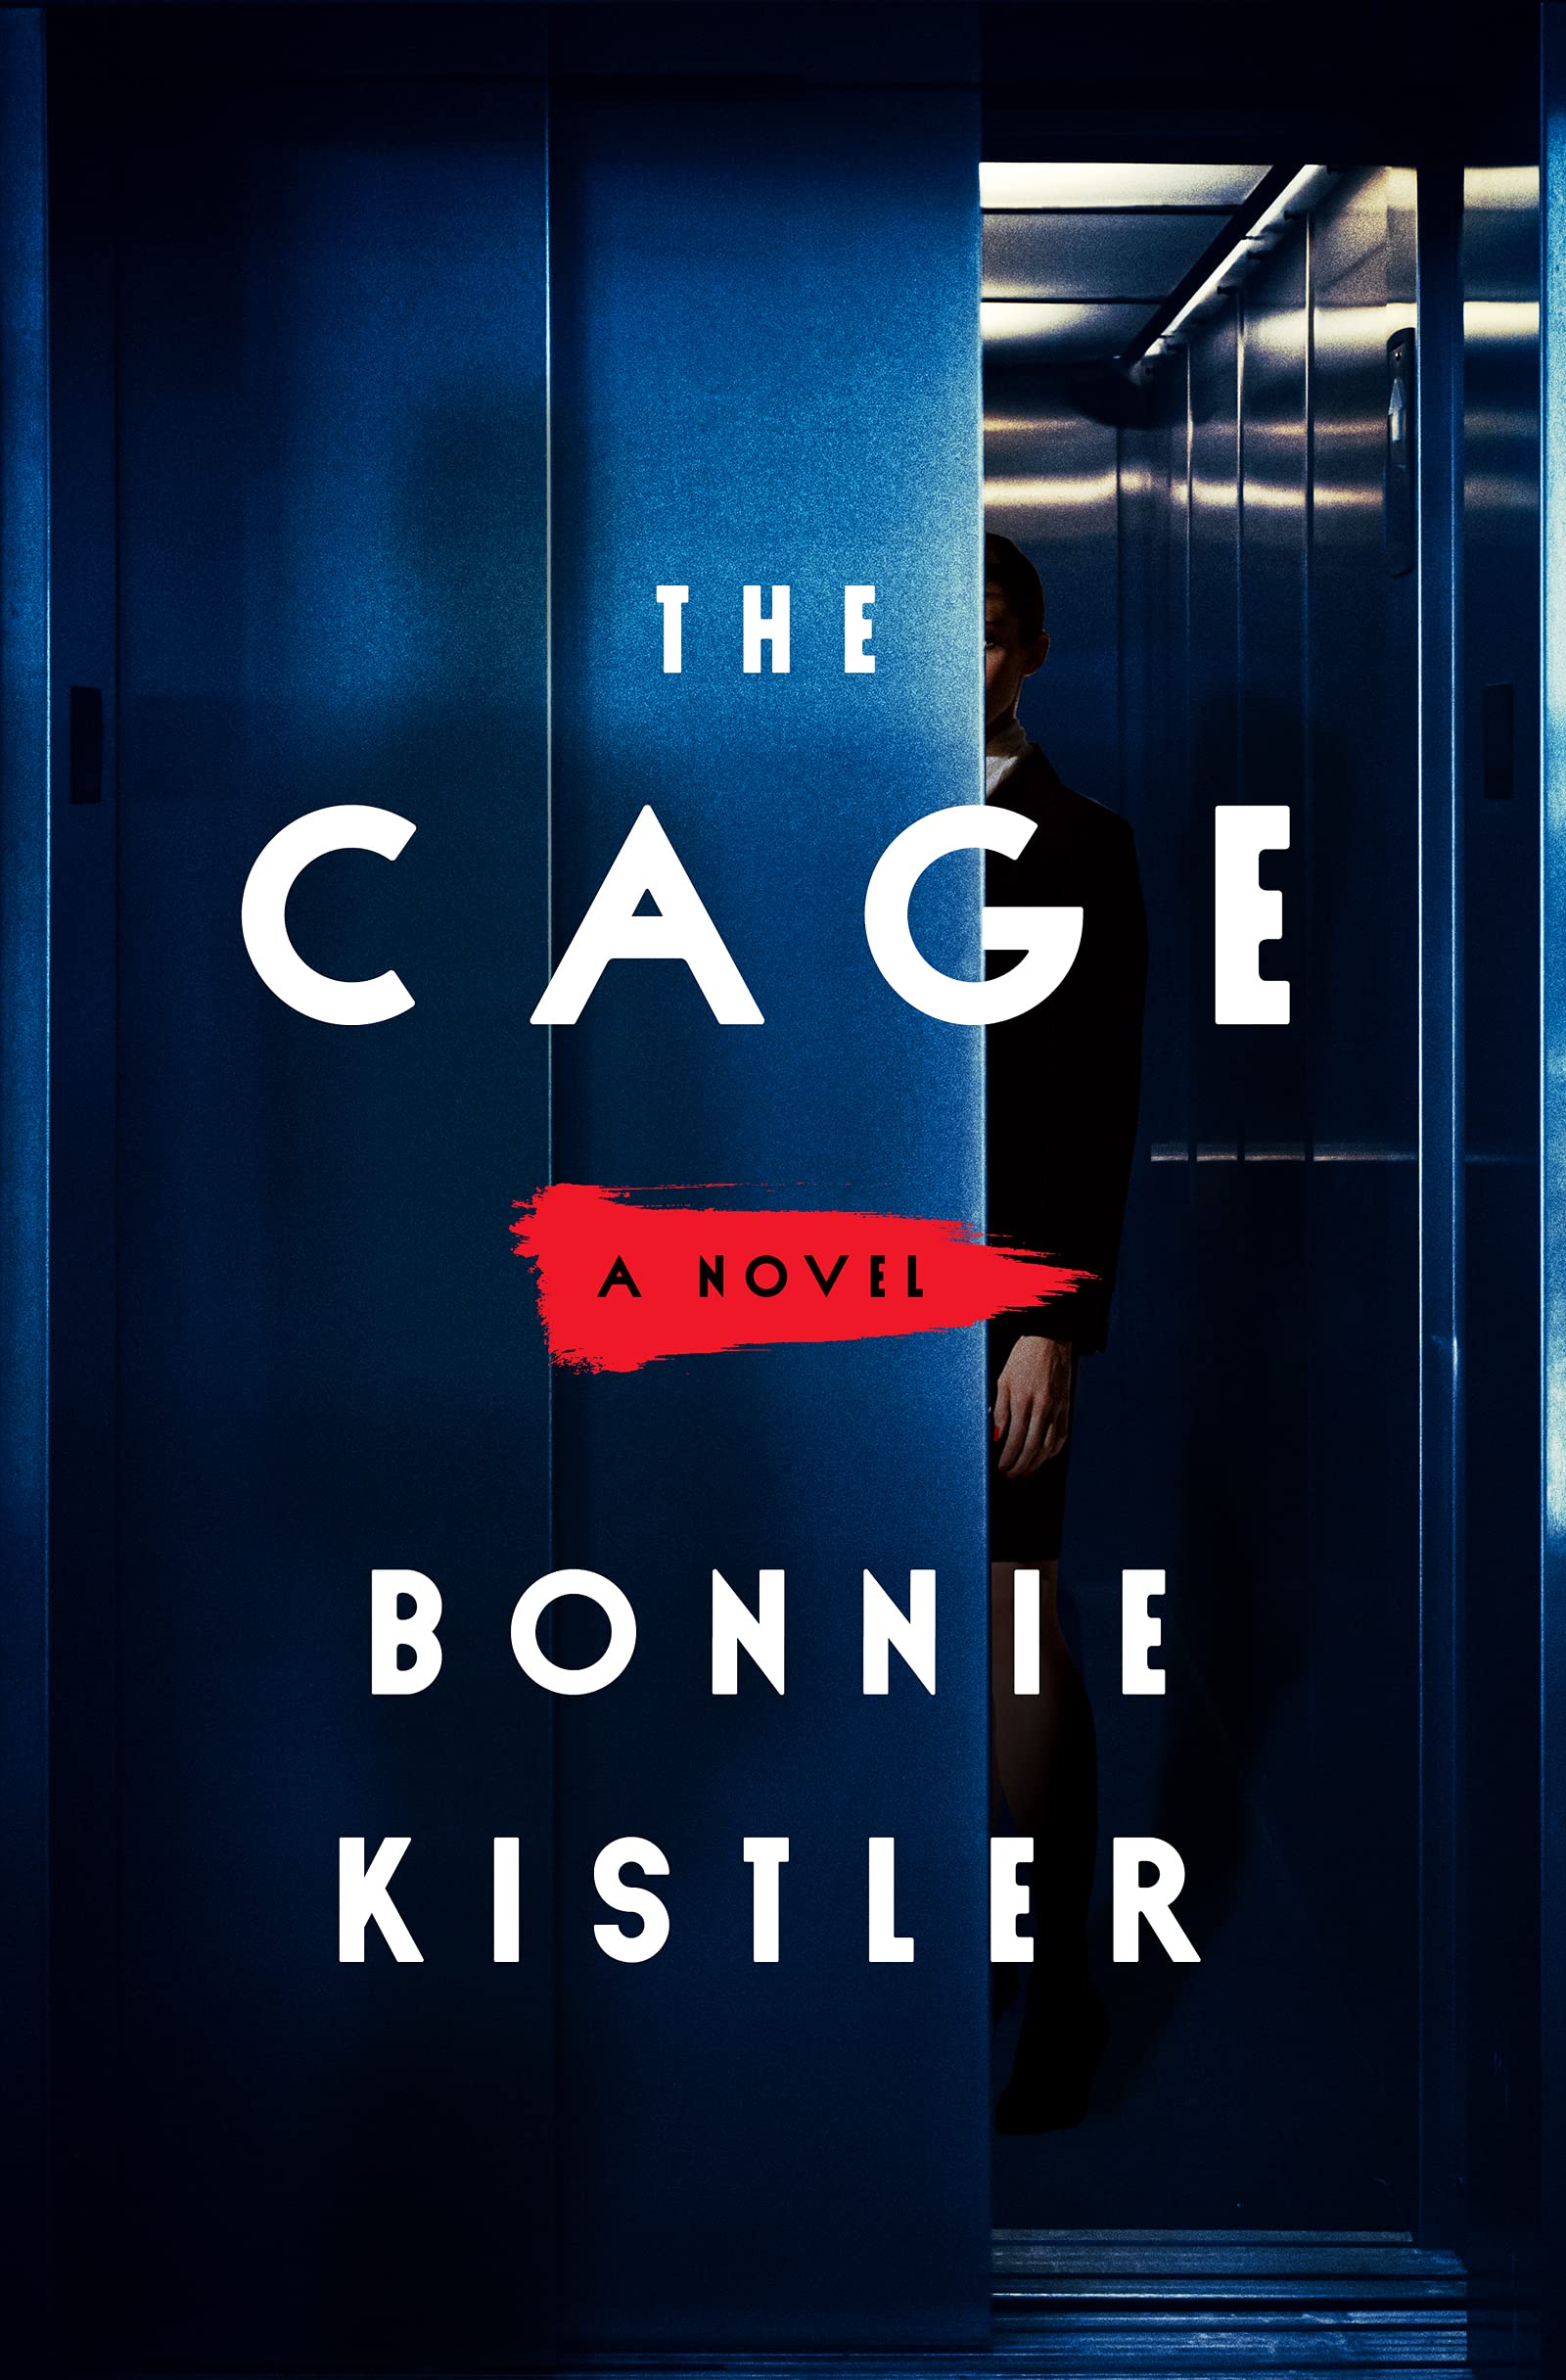 Cover photo of the book "The Cage:" by Bonnie Kistler